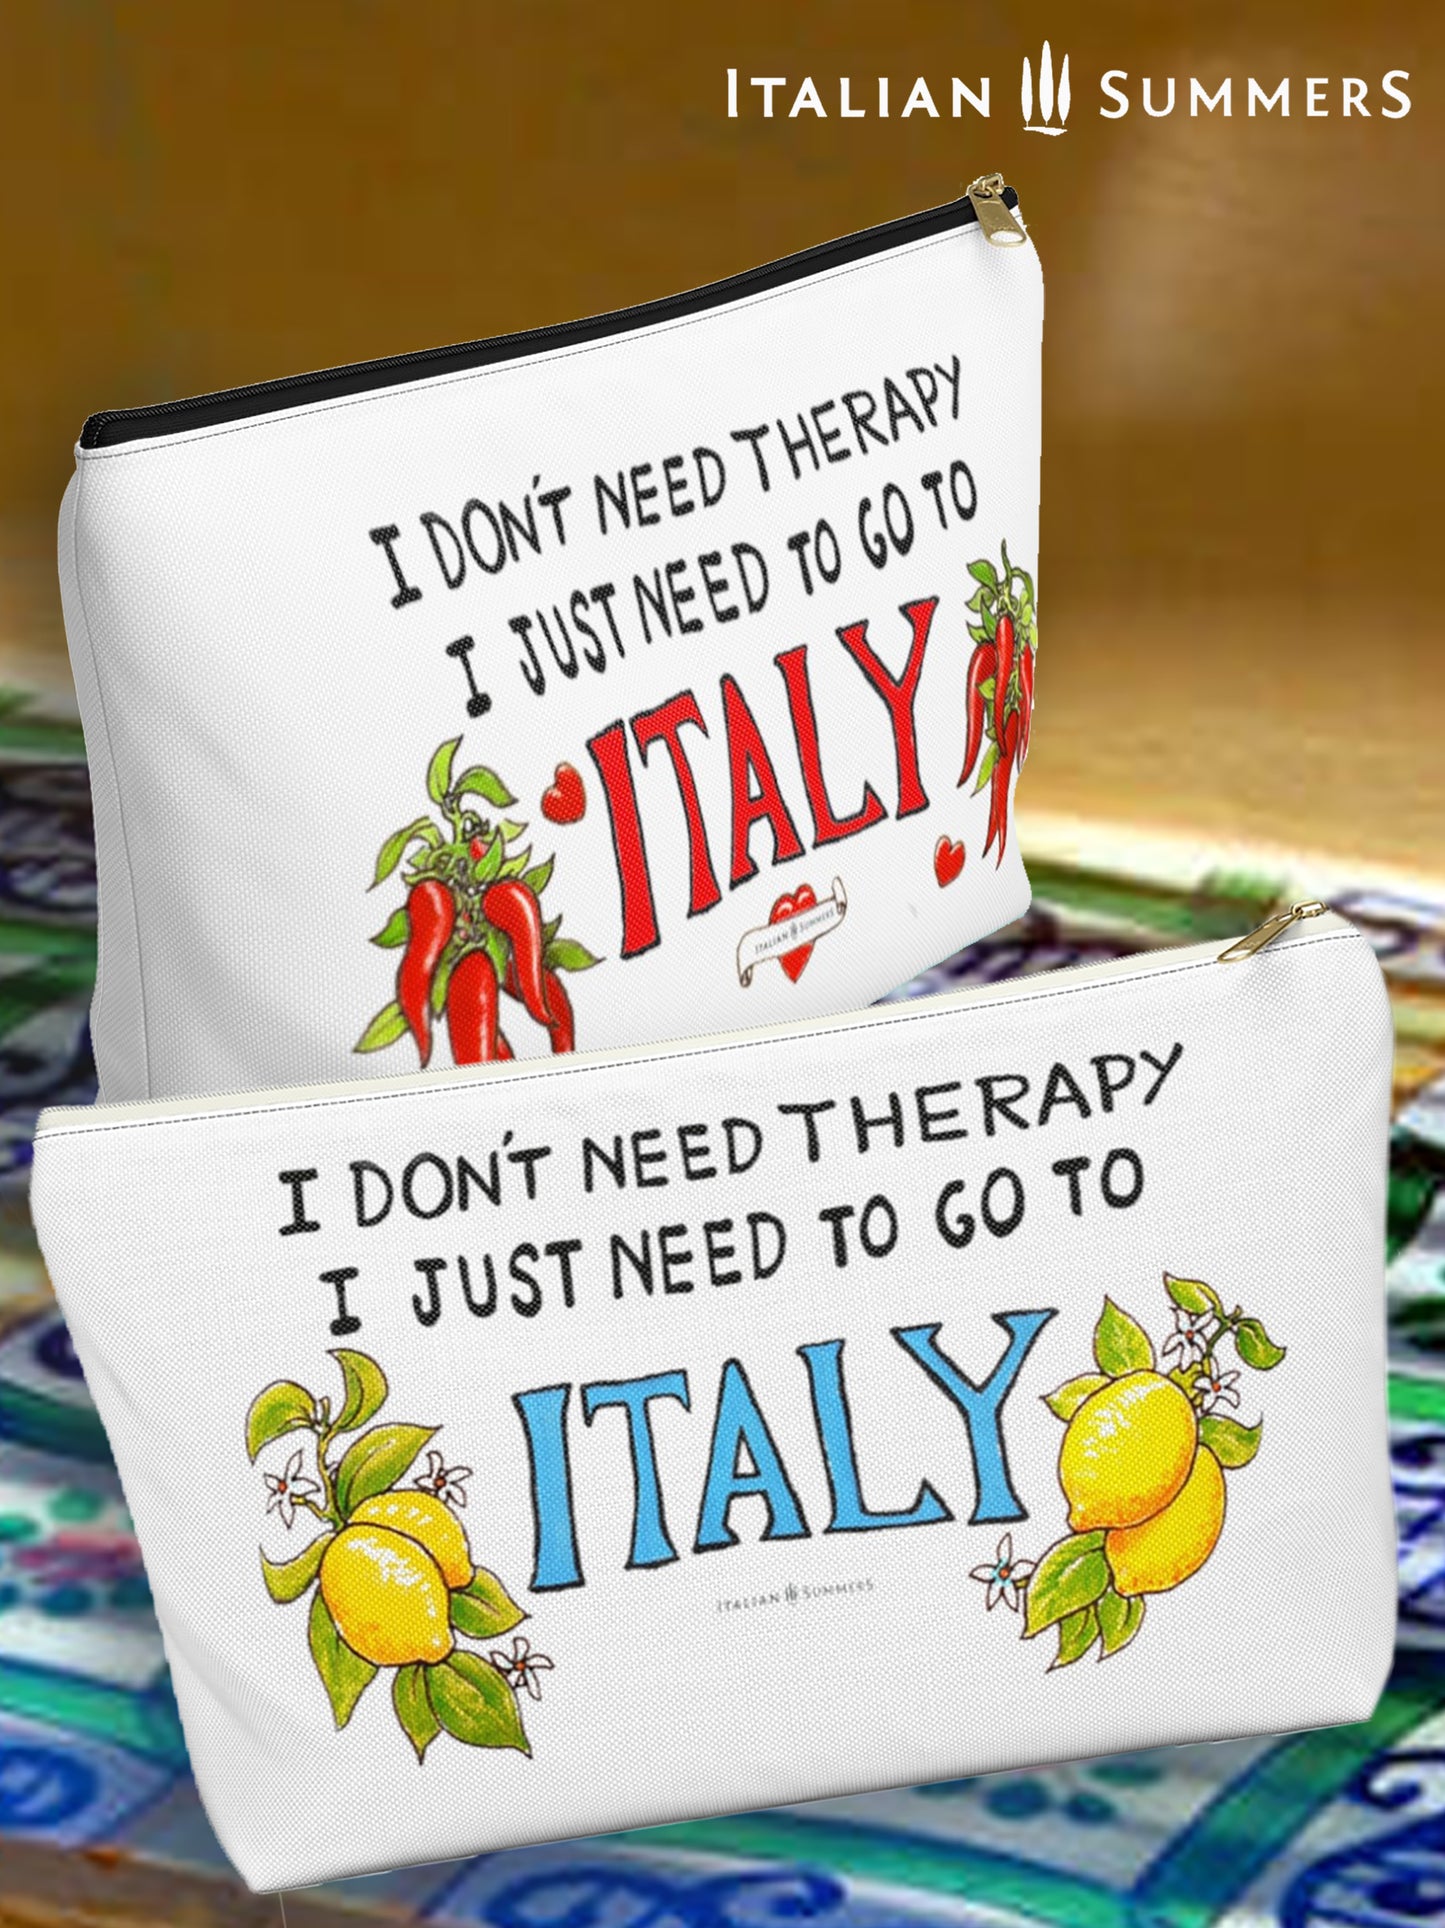 Italy inspired white canvas clutch with the quote I don't need therapy, I just need to go to Italy. The quote is in handwritten with the word Italy in red. On both sides of Italy there are bundles of peppers. The clutch has a black zipper that fits with the black text. Designed by Italian Summers